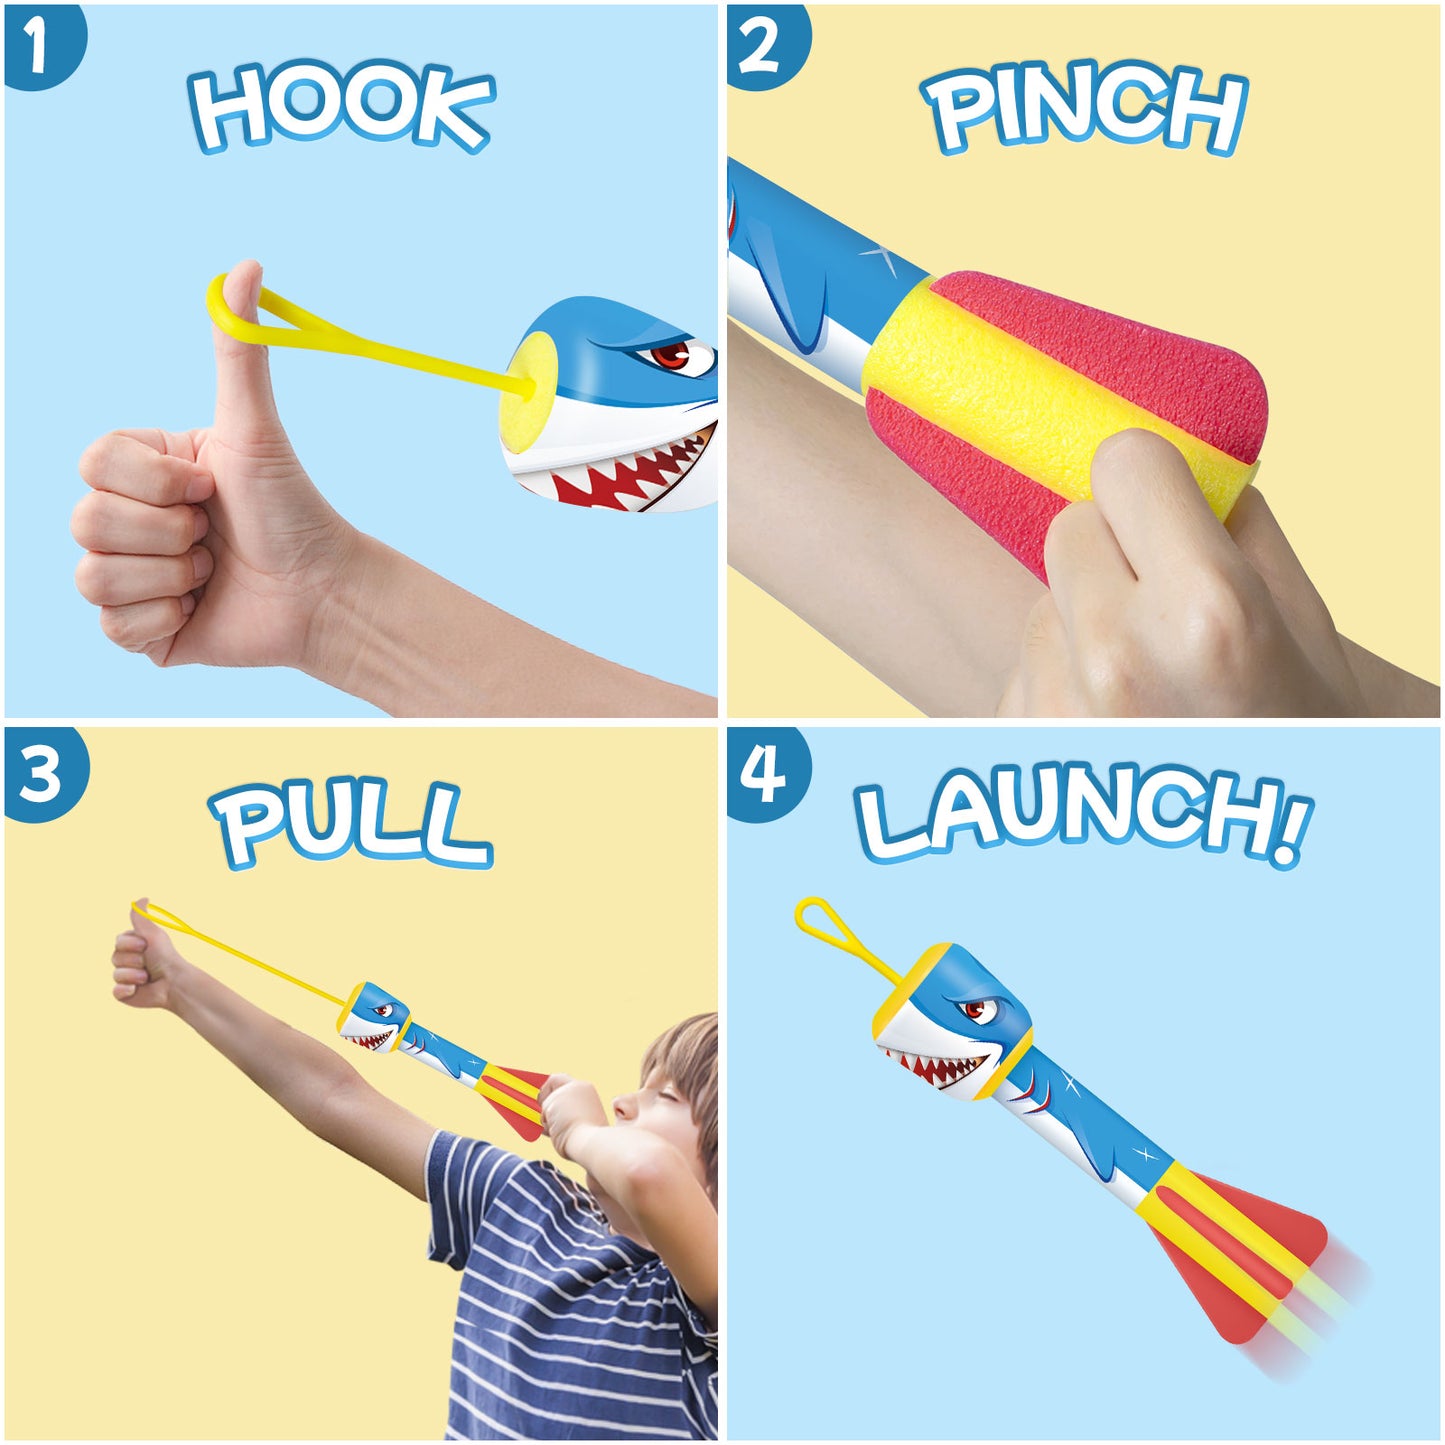 5 Pack Slingshot Finger Rockets,LED Foam Rocket Launchers Outdoor Indoor Camping Game Activities, Easter Basket Stuffers Gifts Party Favor Toys for Kids Ages 5 6 7 8